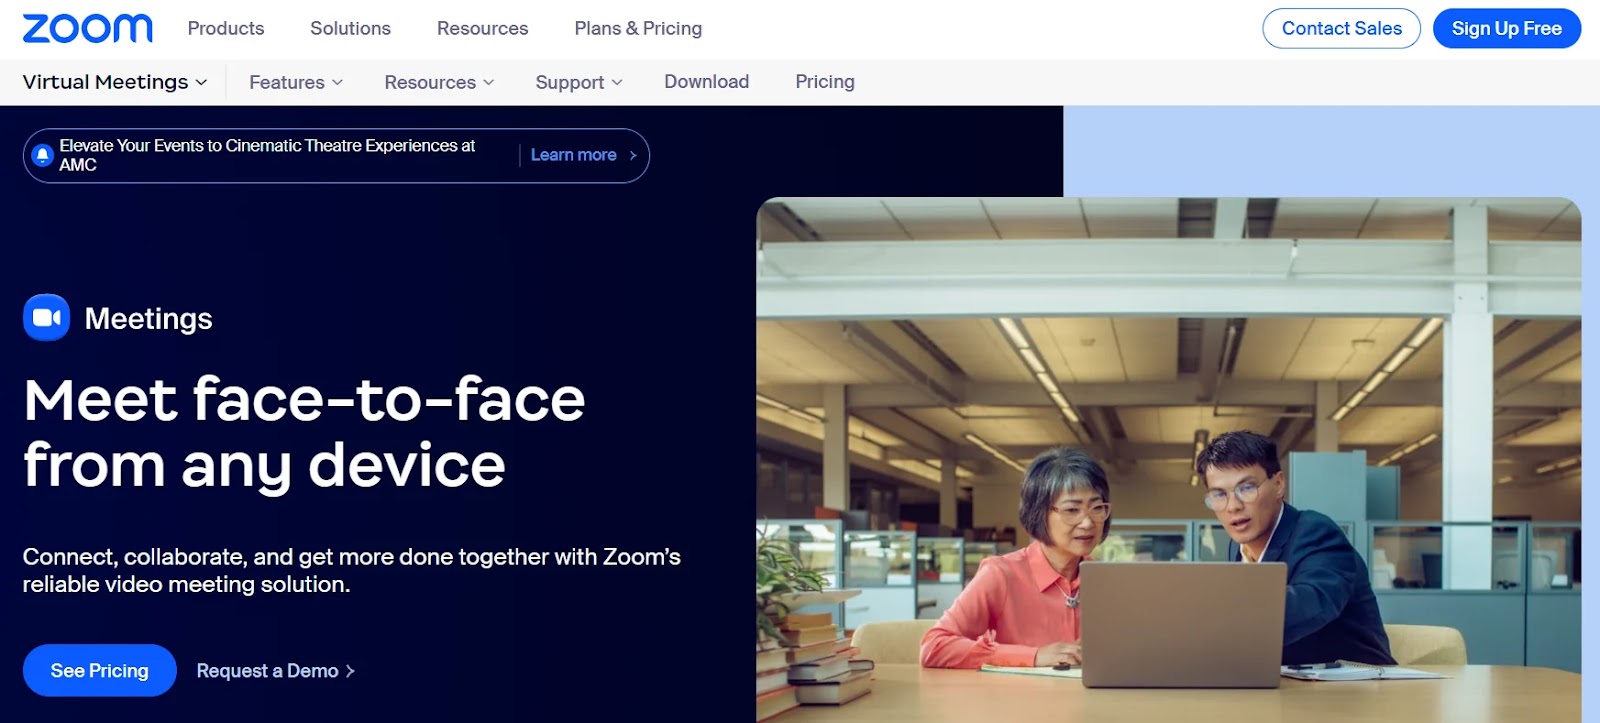 Zoom’s product page for Meetings